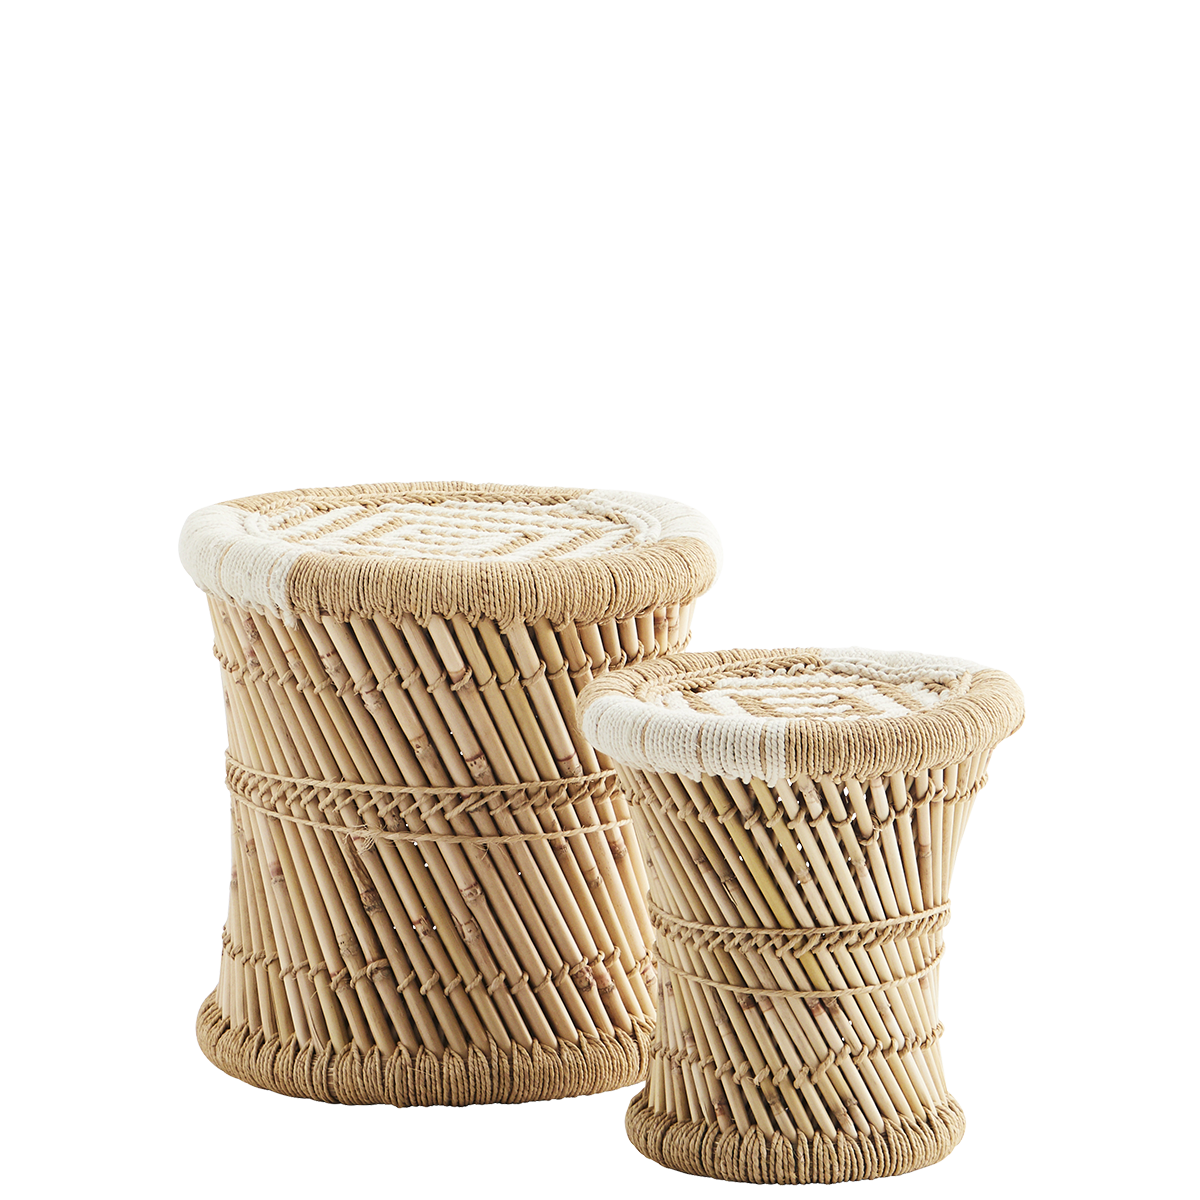 Bamboo stools w/ cotton rope